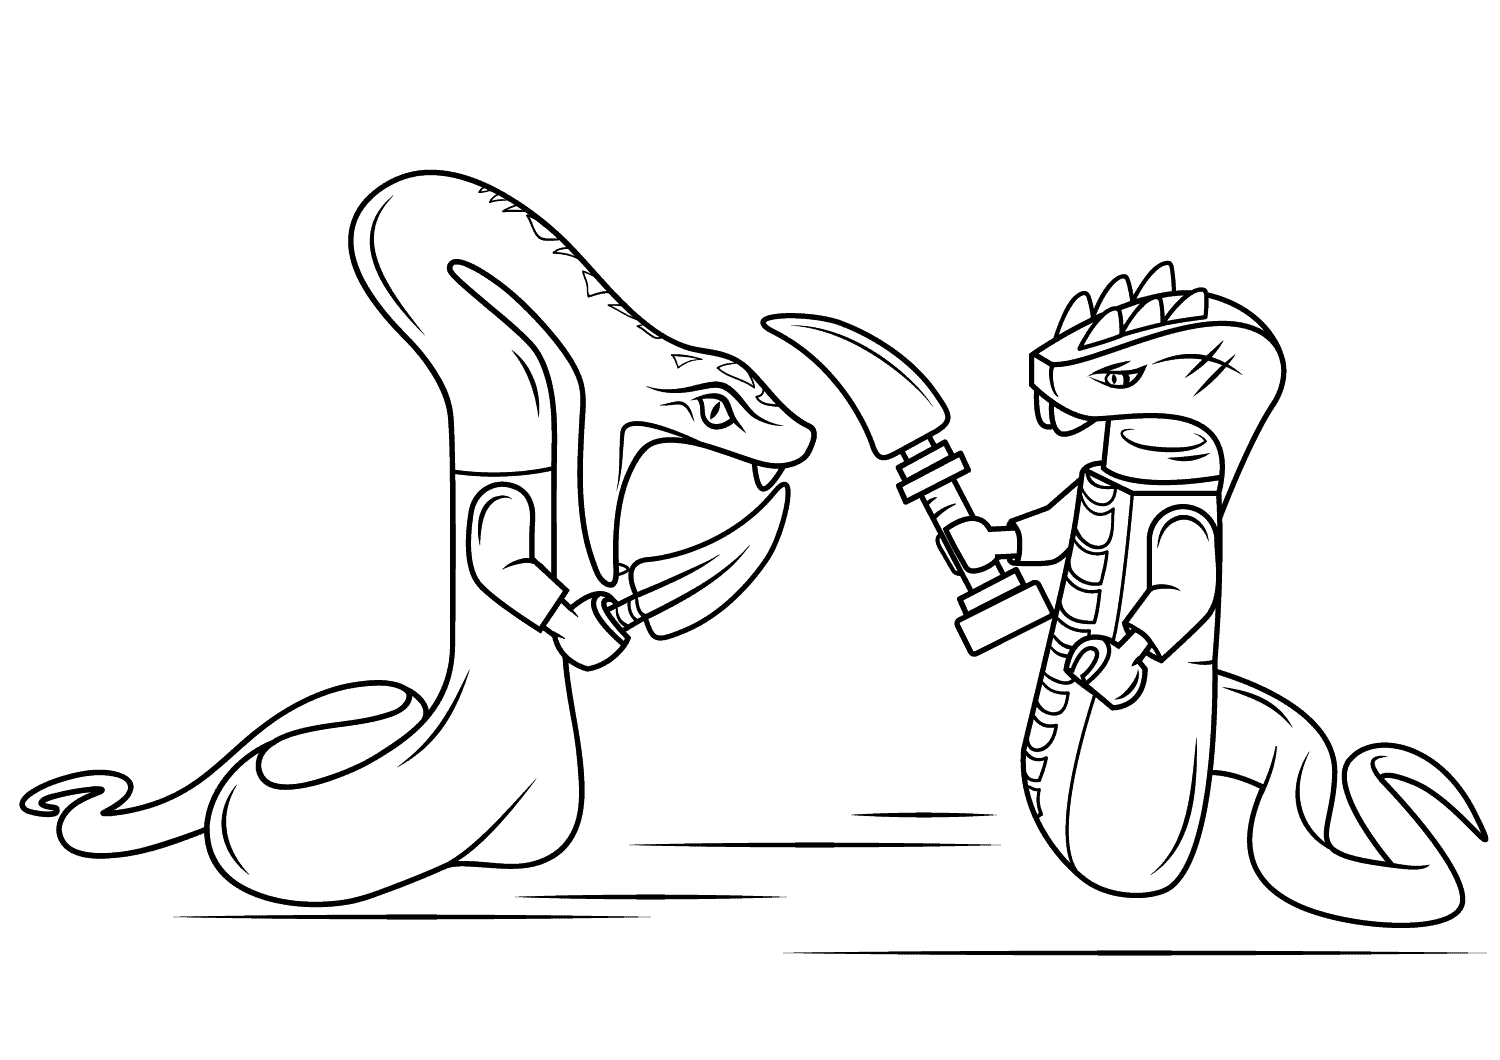 Lego Ninjago Snakes Acidicus combatte contro Pythor Coloring Pages